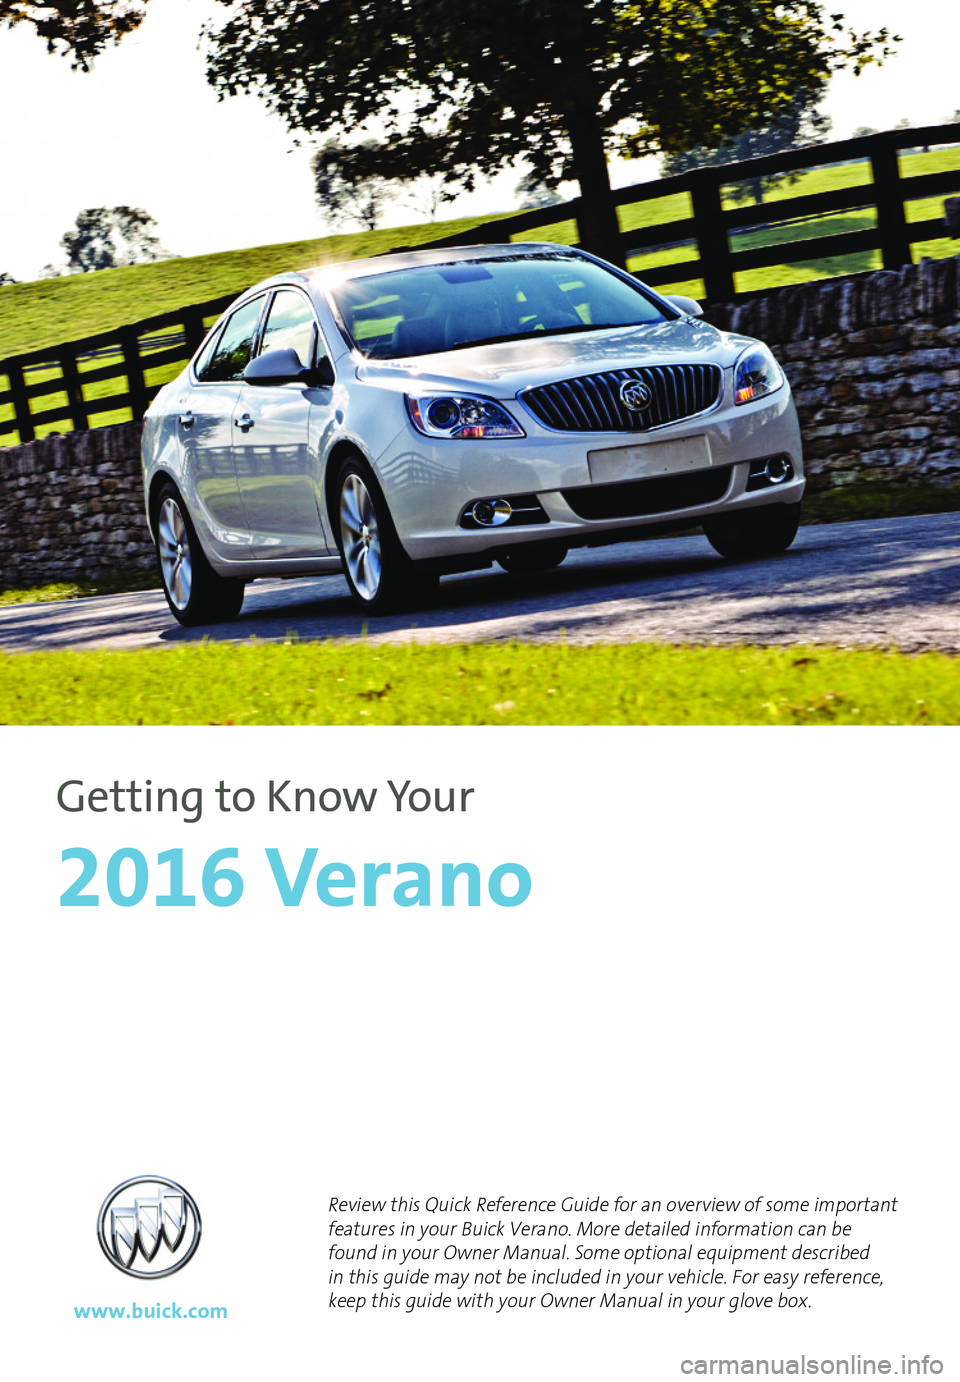 BUICK VERANO 2016  Get To Know Guide 1
Review this Quick Reference Guide for an overview of some important features in your Buick Verano. More detailed information can be found in your Owner Manual. Some optional equipment described in t